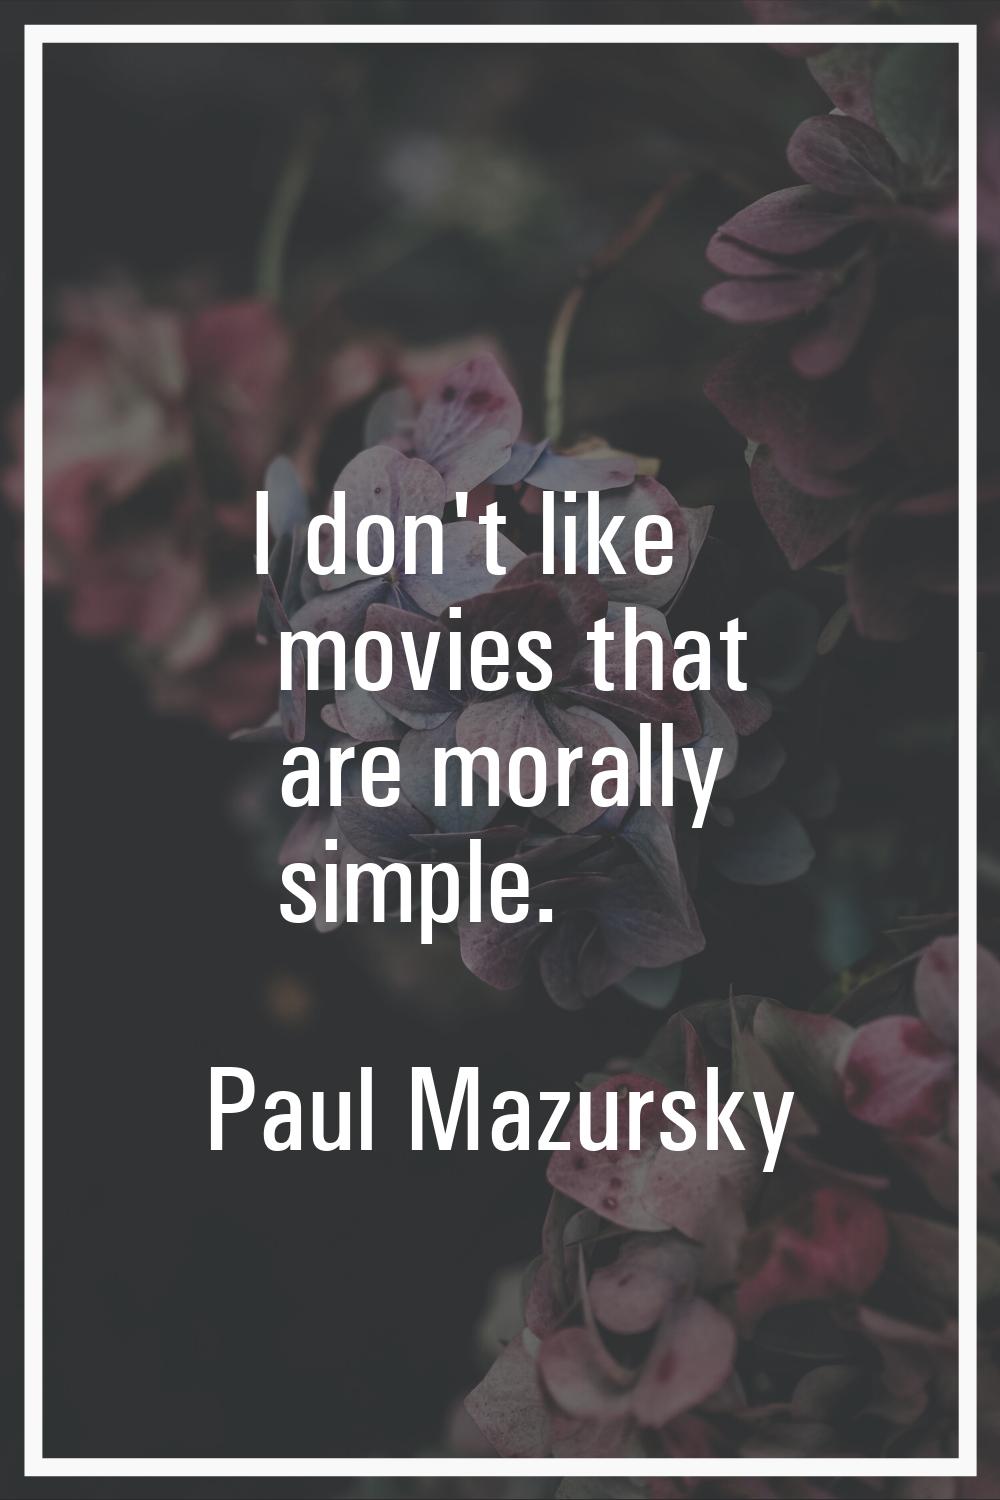 I don't like movies that are morally simple.